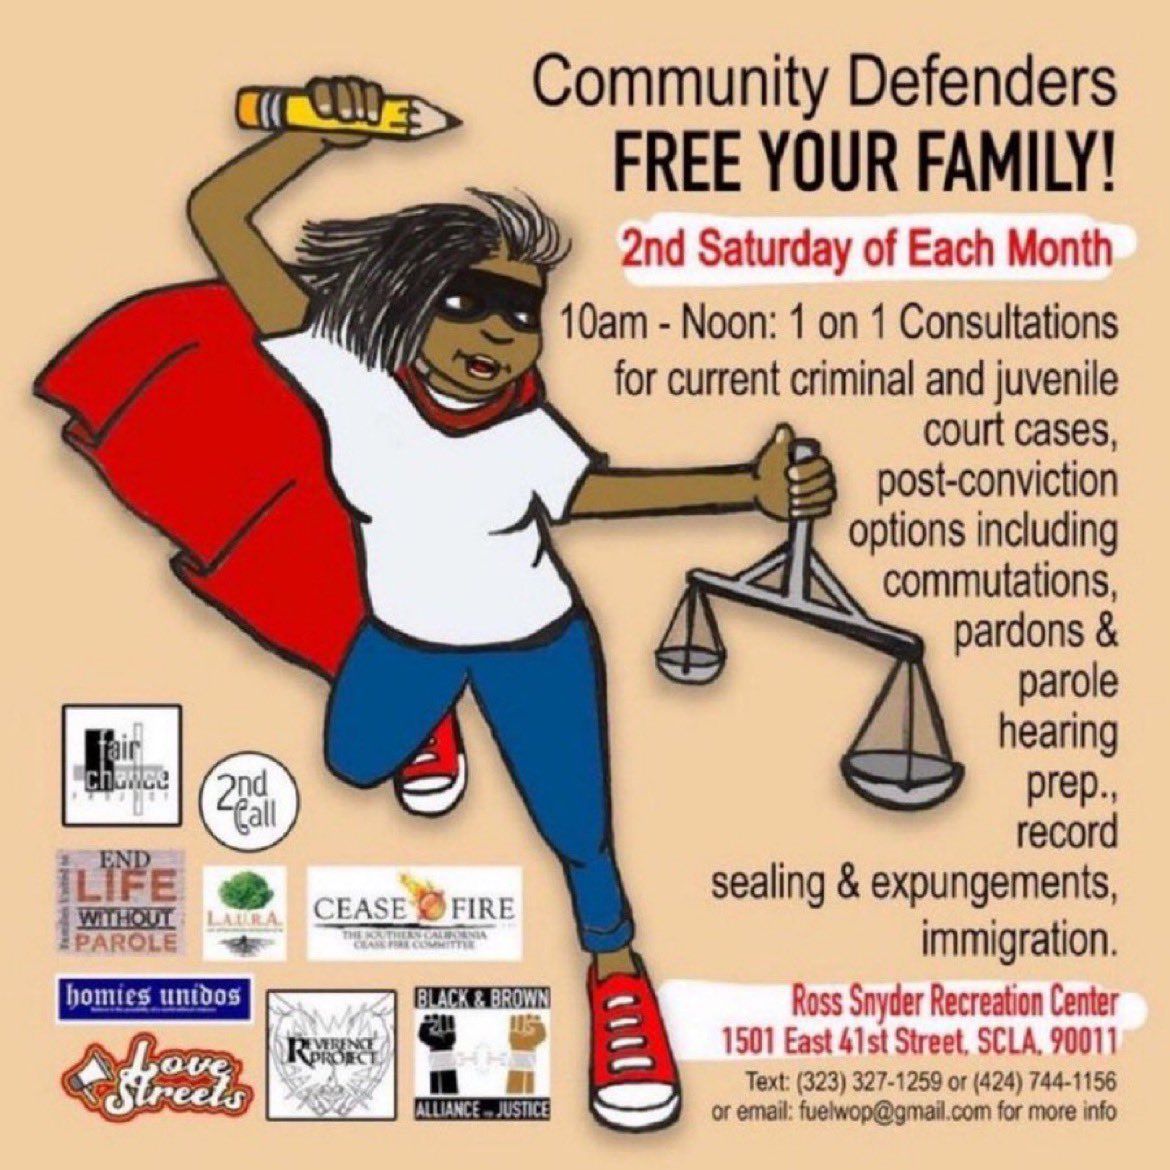 Flyer: Saturday April 12, free community defender resources at the Ross Snyder Rec Center in LA